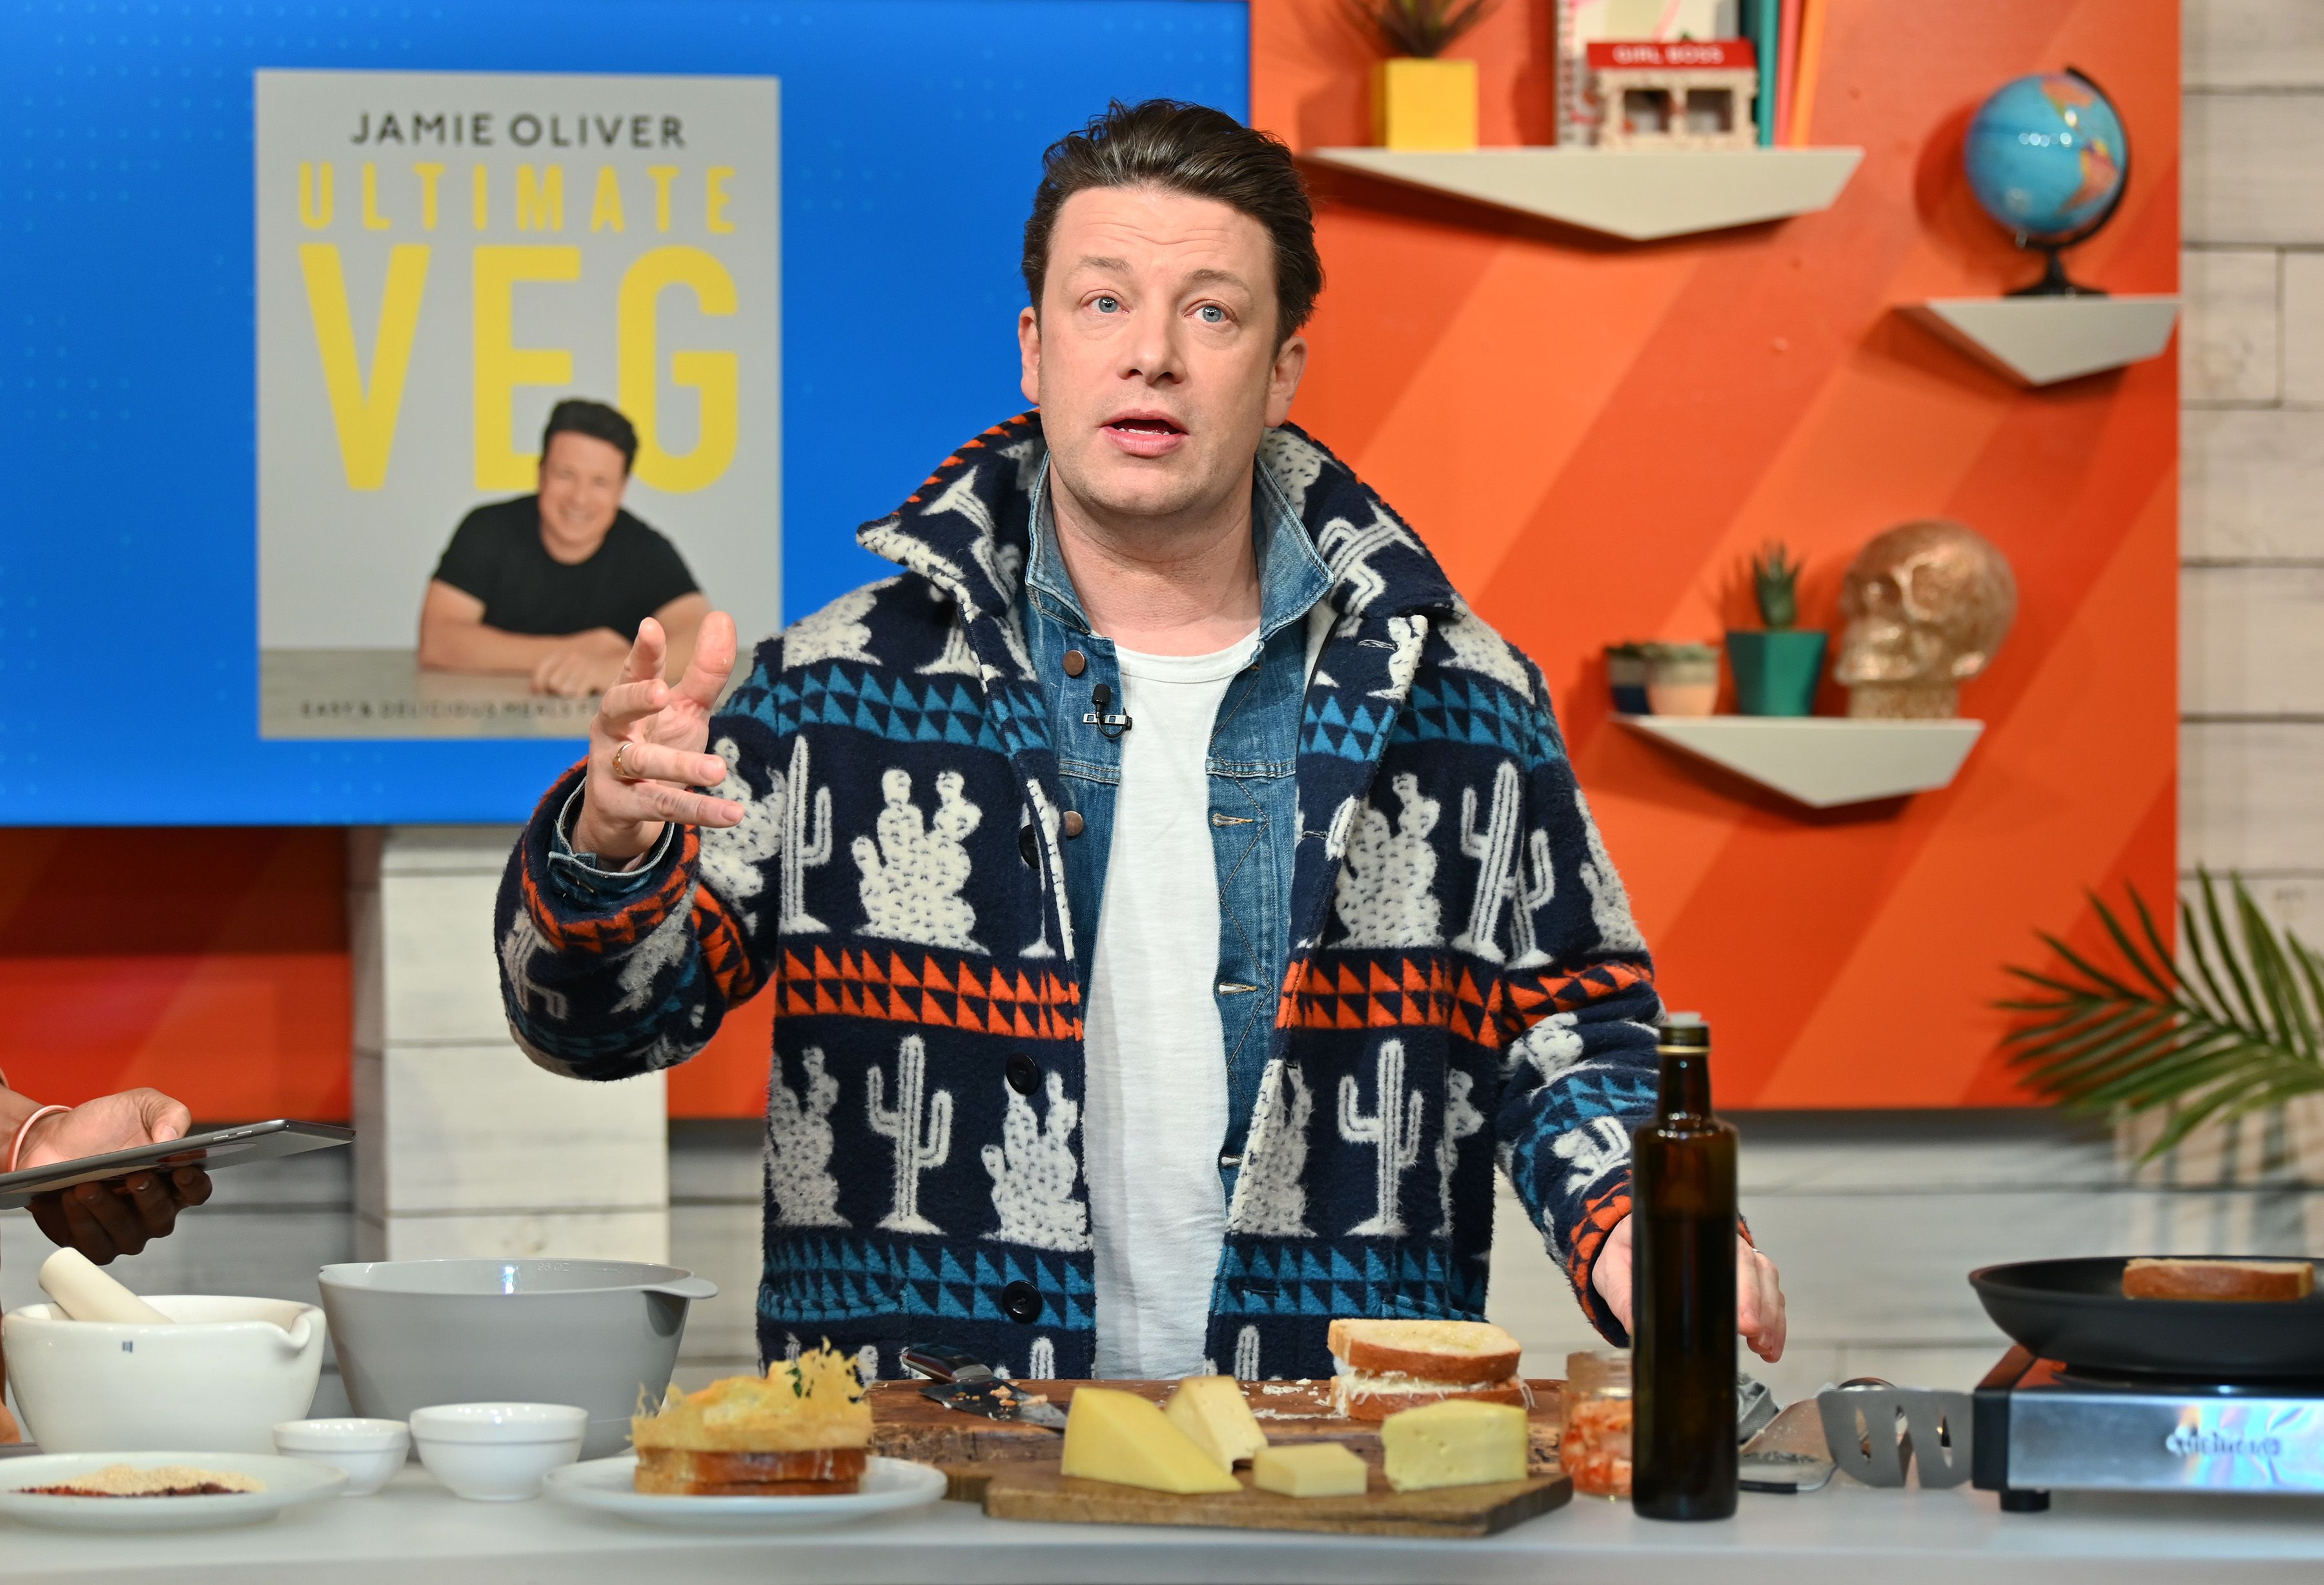 Jamie Oliver says he's hired cultural appropriation specialists to advise  on cookbooks